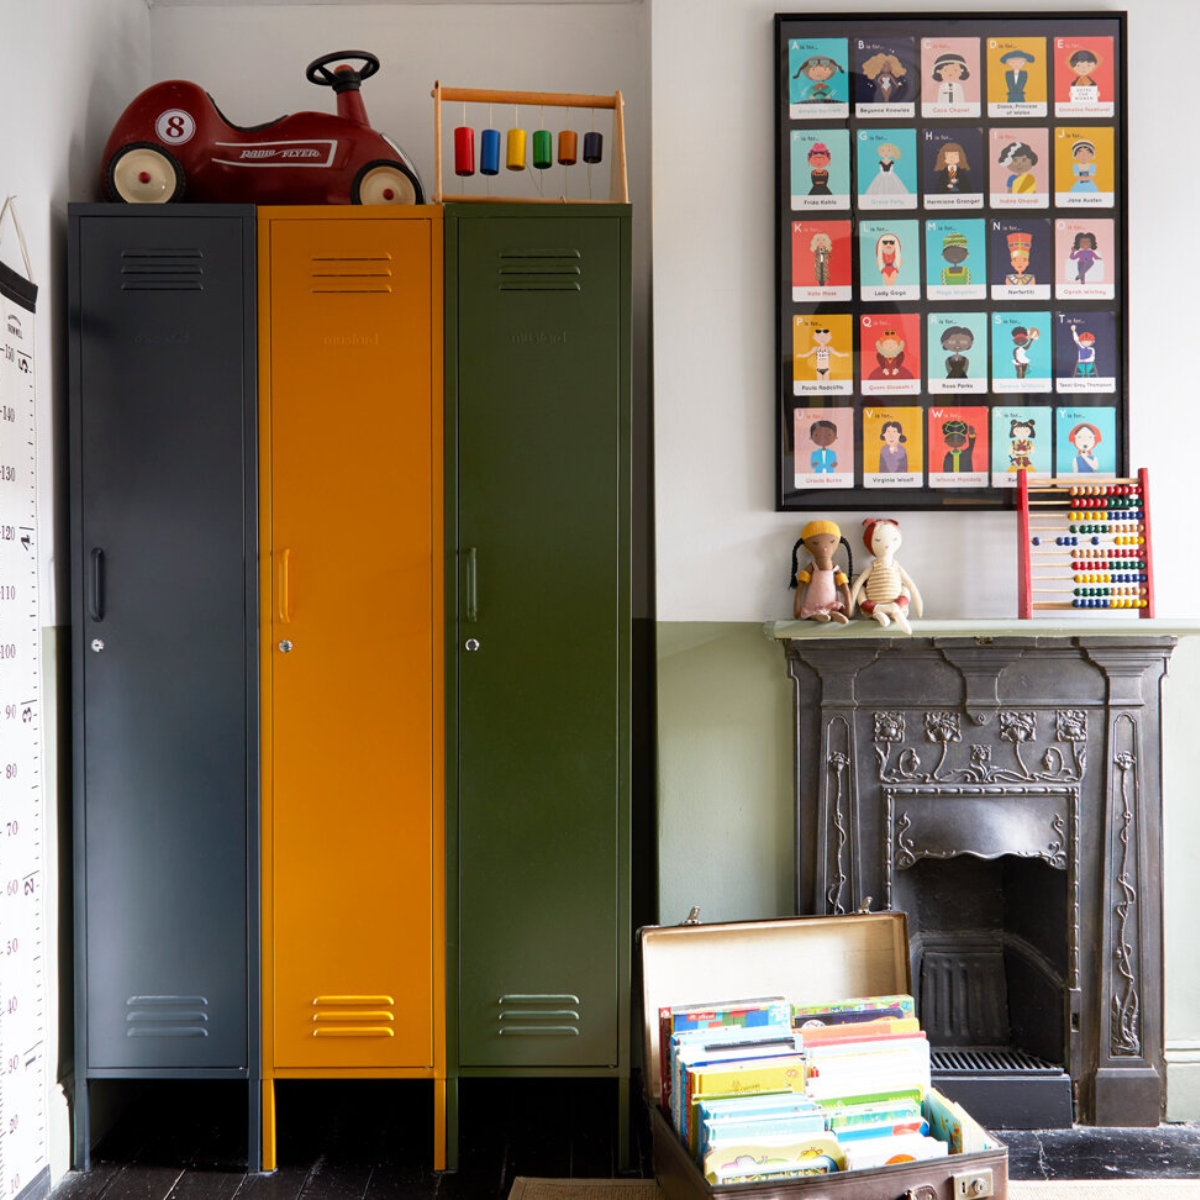 In a retro-inspired room, three Skinnys in Slate, Mustard and Olive sit flush into a nook next to an ornate Victorian fireplace. There is a vintage red metal toy car on top, and an open case full of colorful books on the floor.